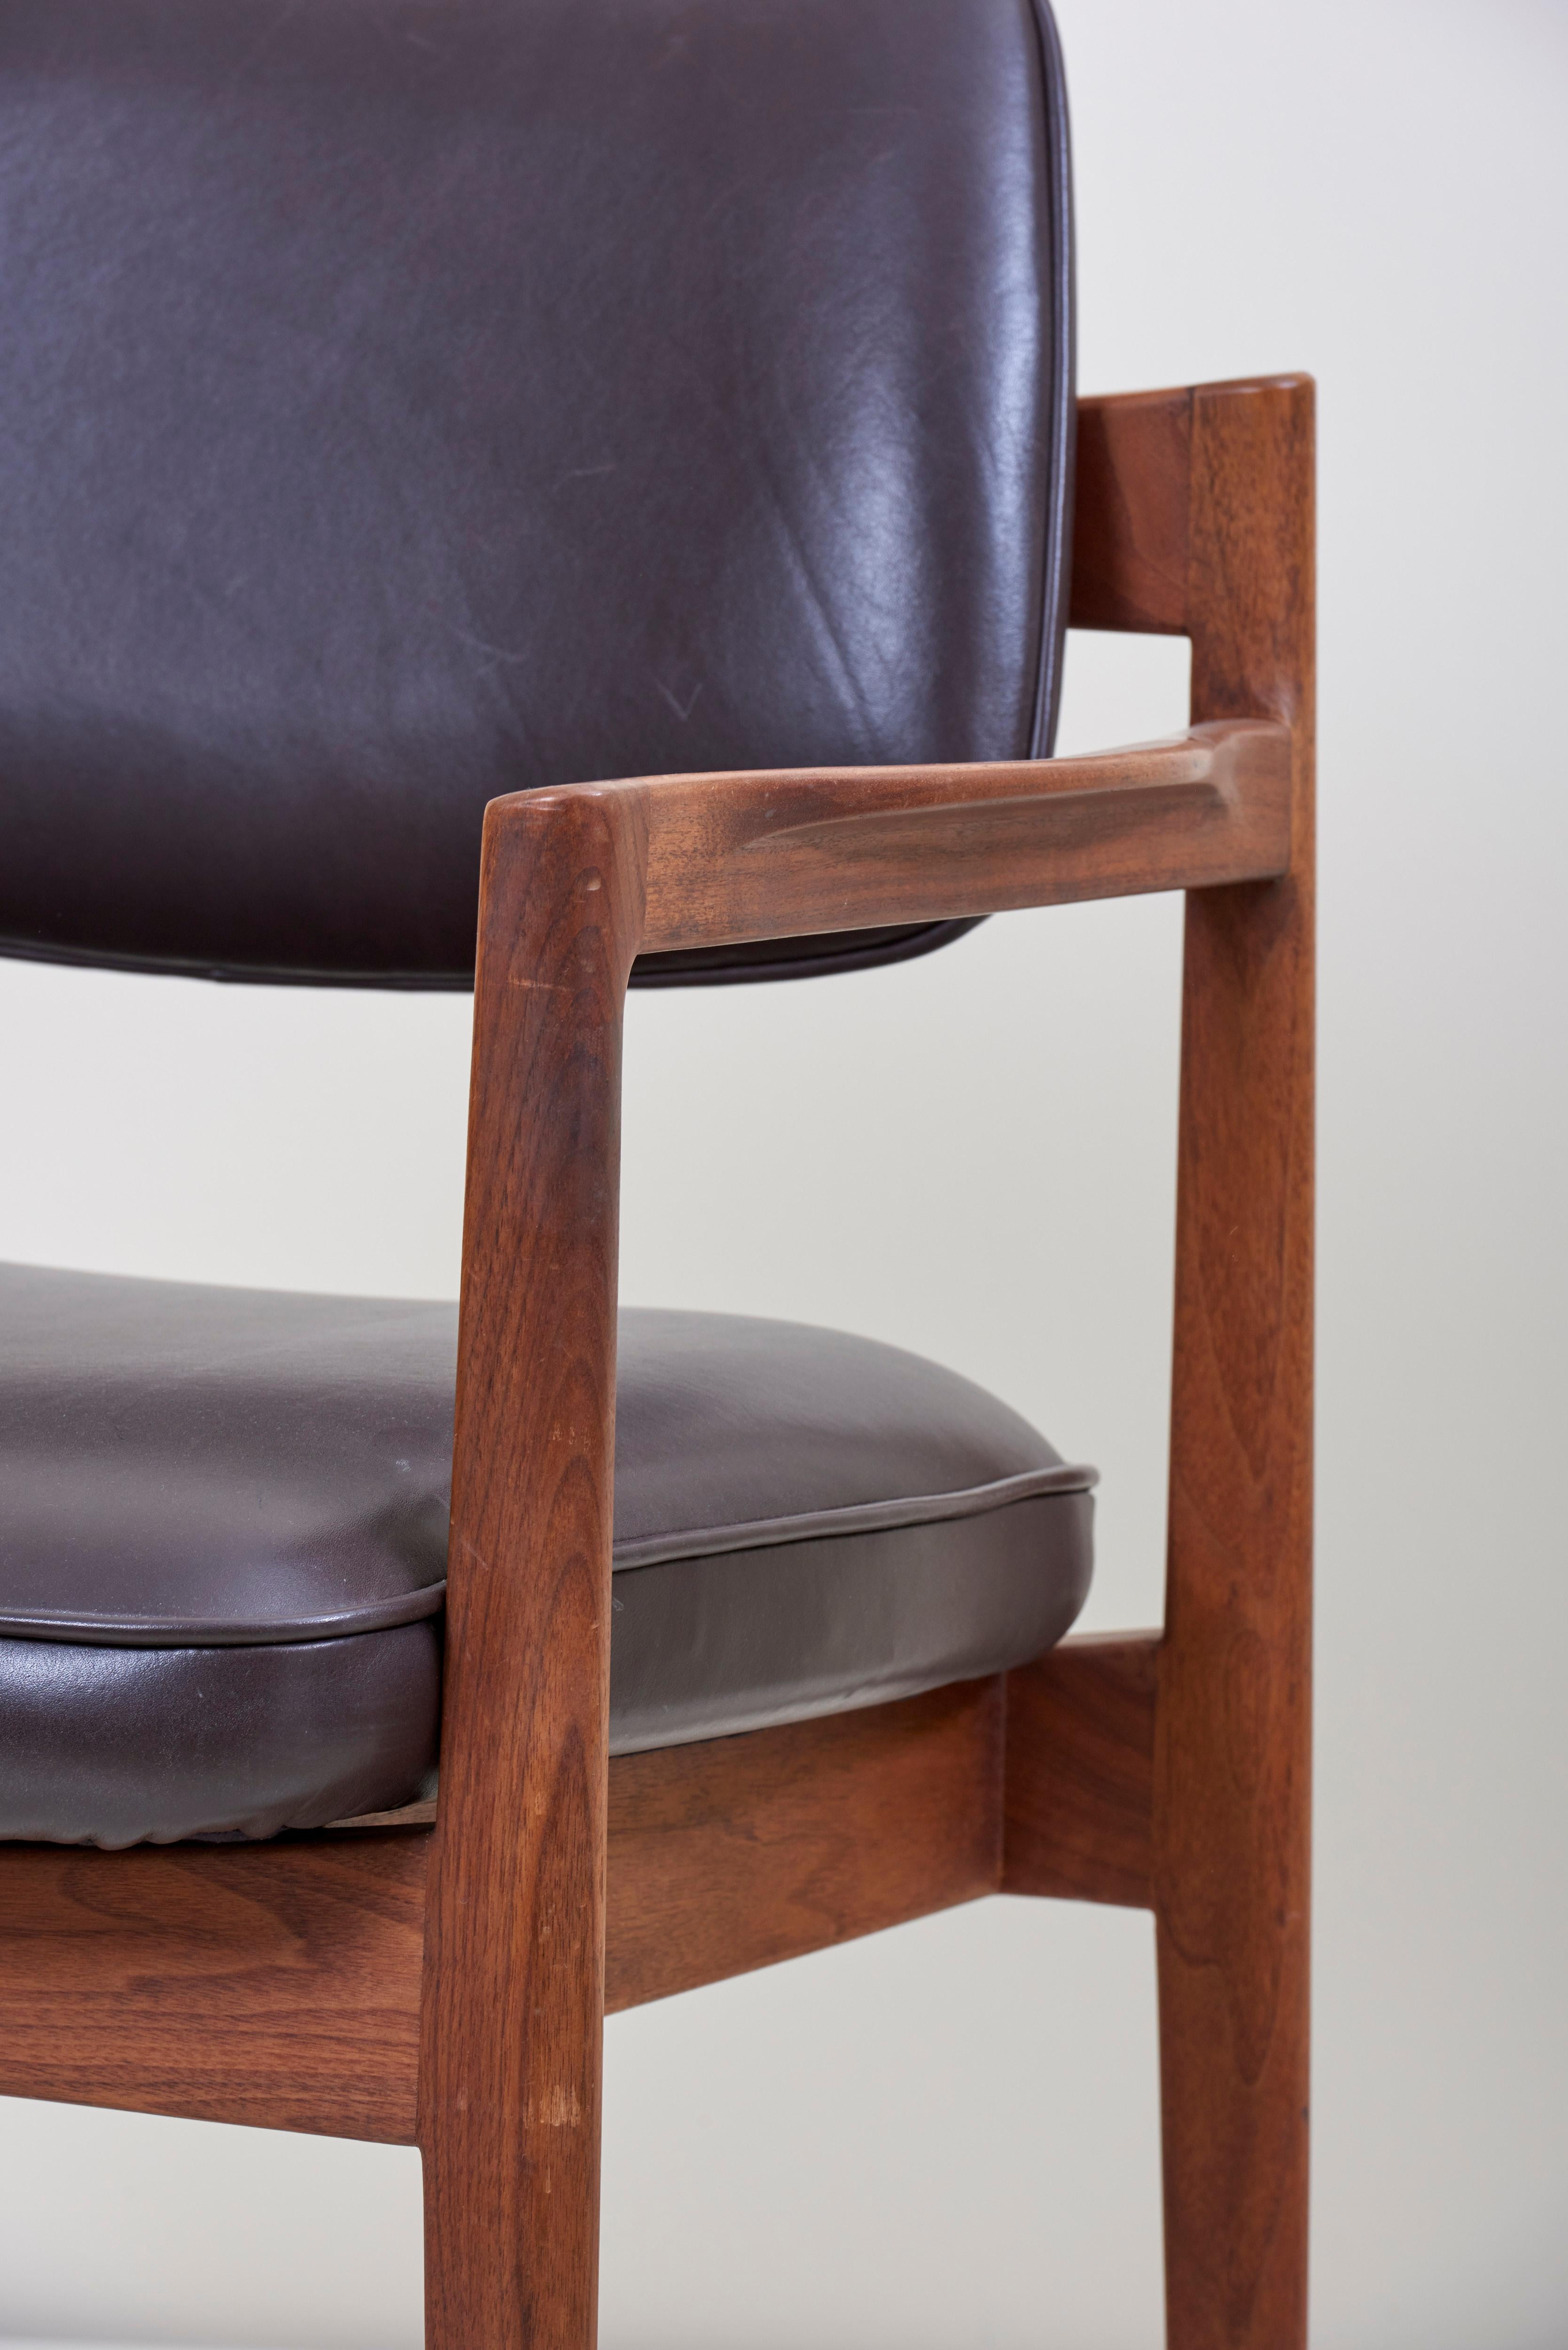 Mid-20th Century Jens Risom Armchair in Walnut and Leather by Jens Risom Inc.